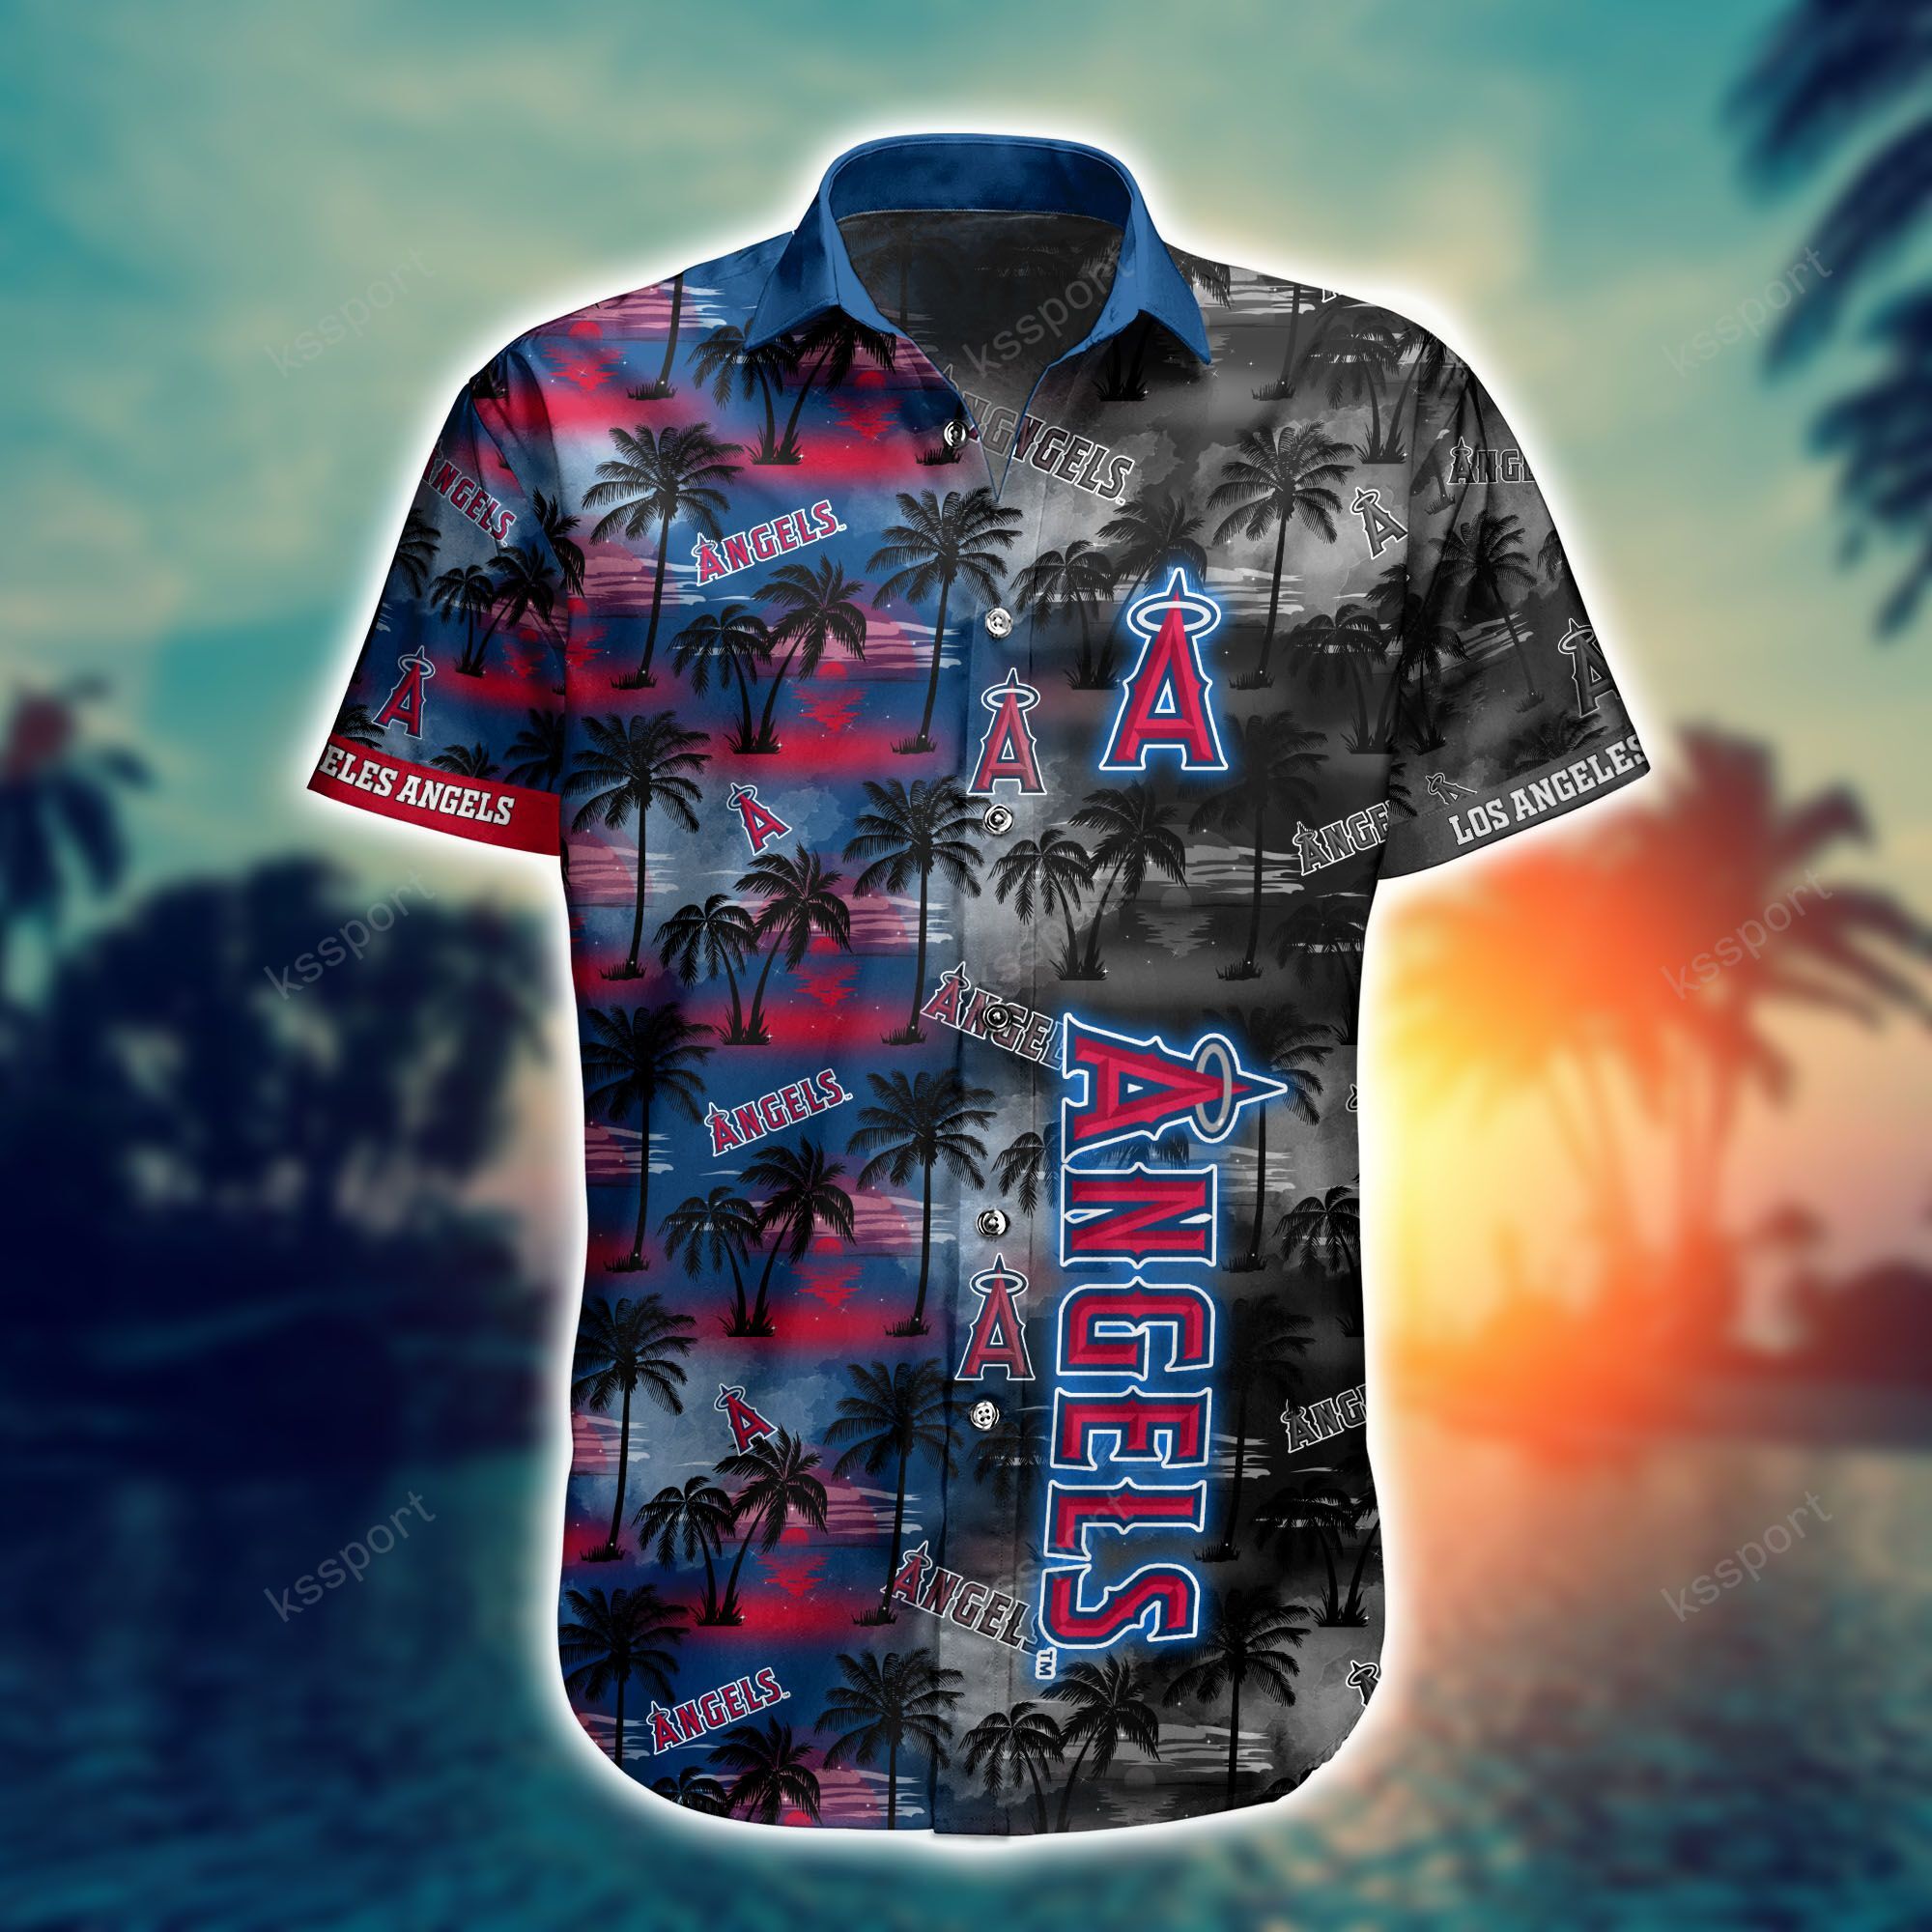 Top cool Hawaiian shirt 2022 - Make sure you get yours today before they run out! 227